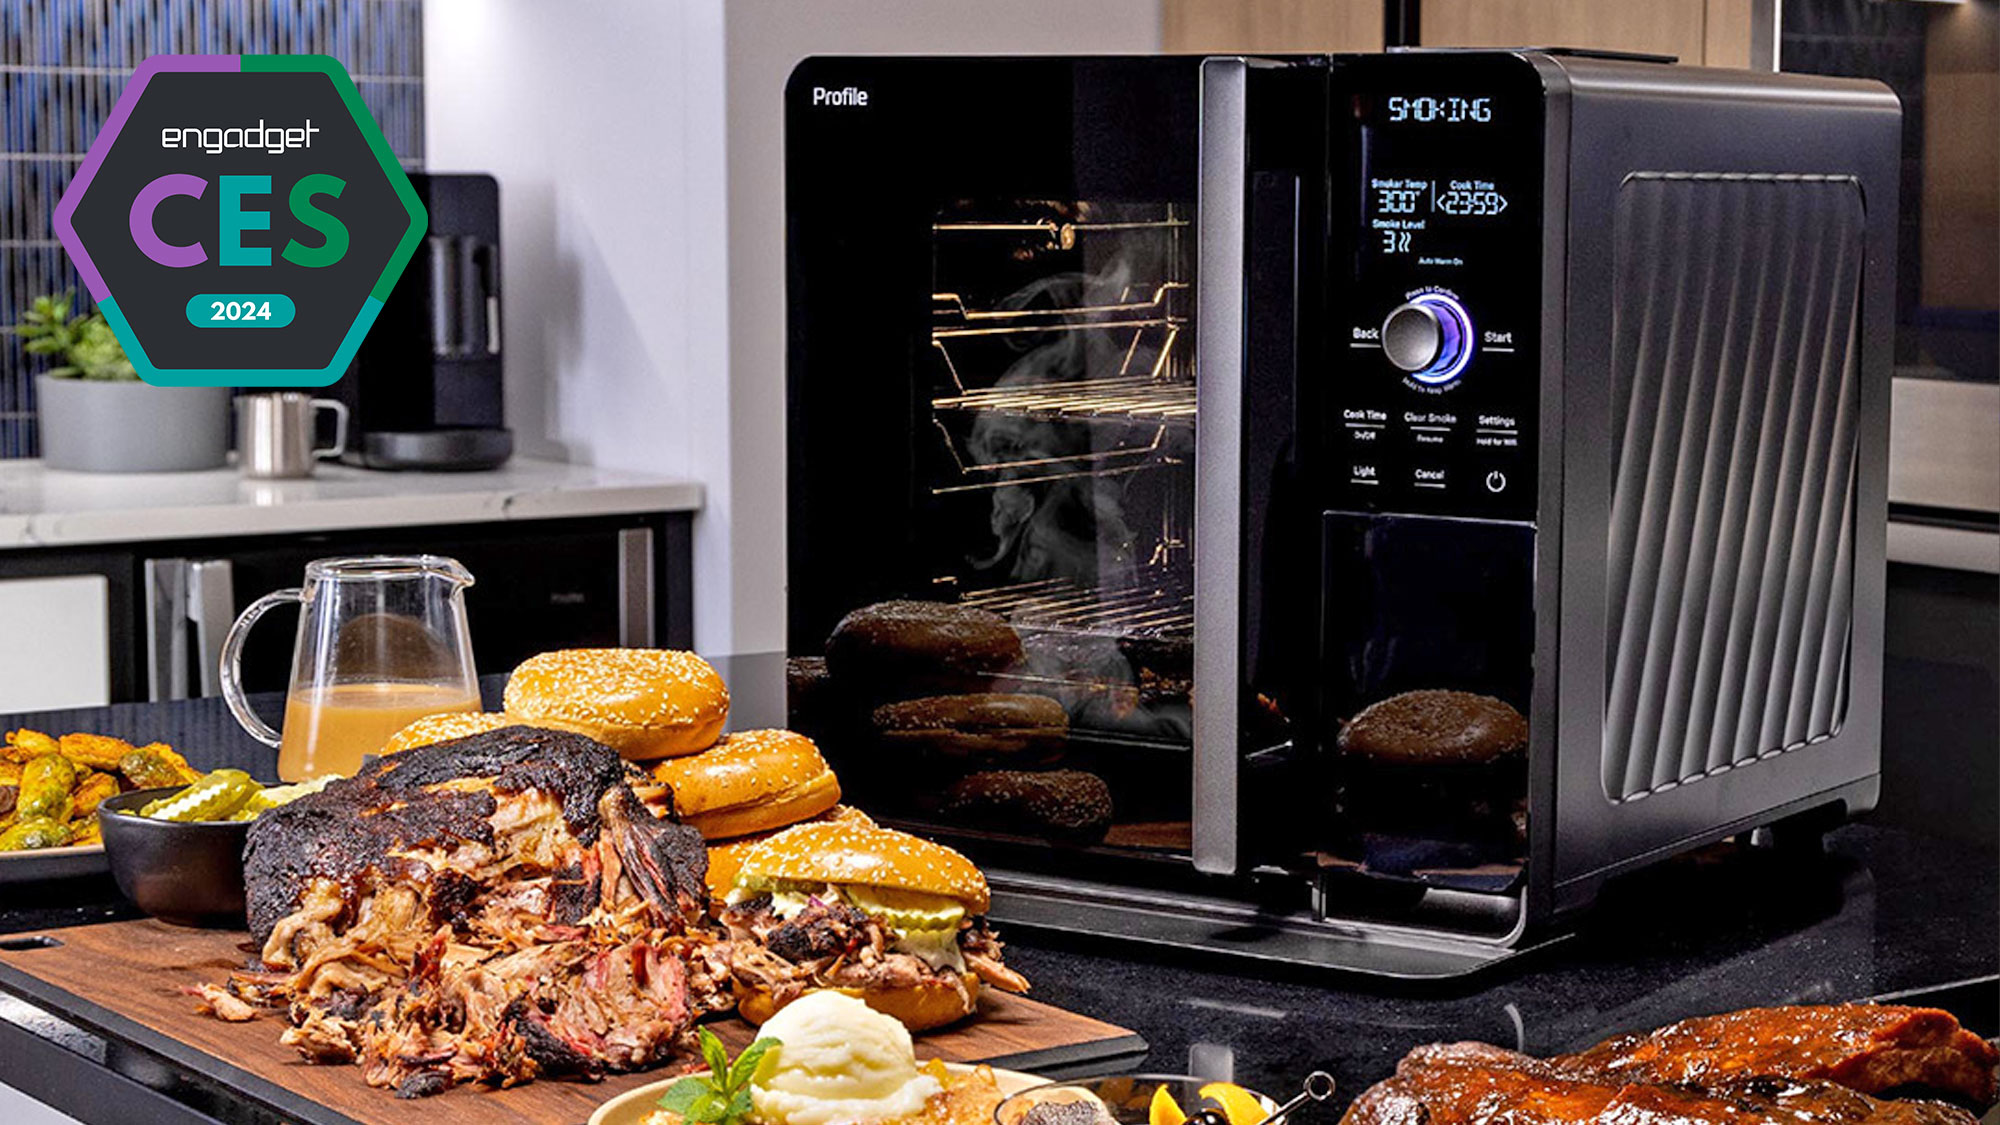 An image with a badge for Engadget Best of CES 2024 showing the product: GE Profile Smart Indoor Smoker on a crowded kitchen island surrounded by stacks of bristket and burger buns.